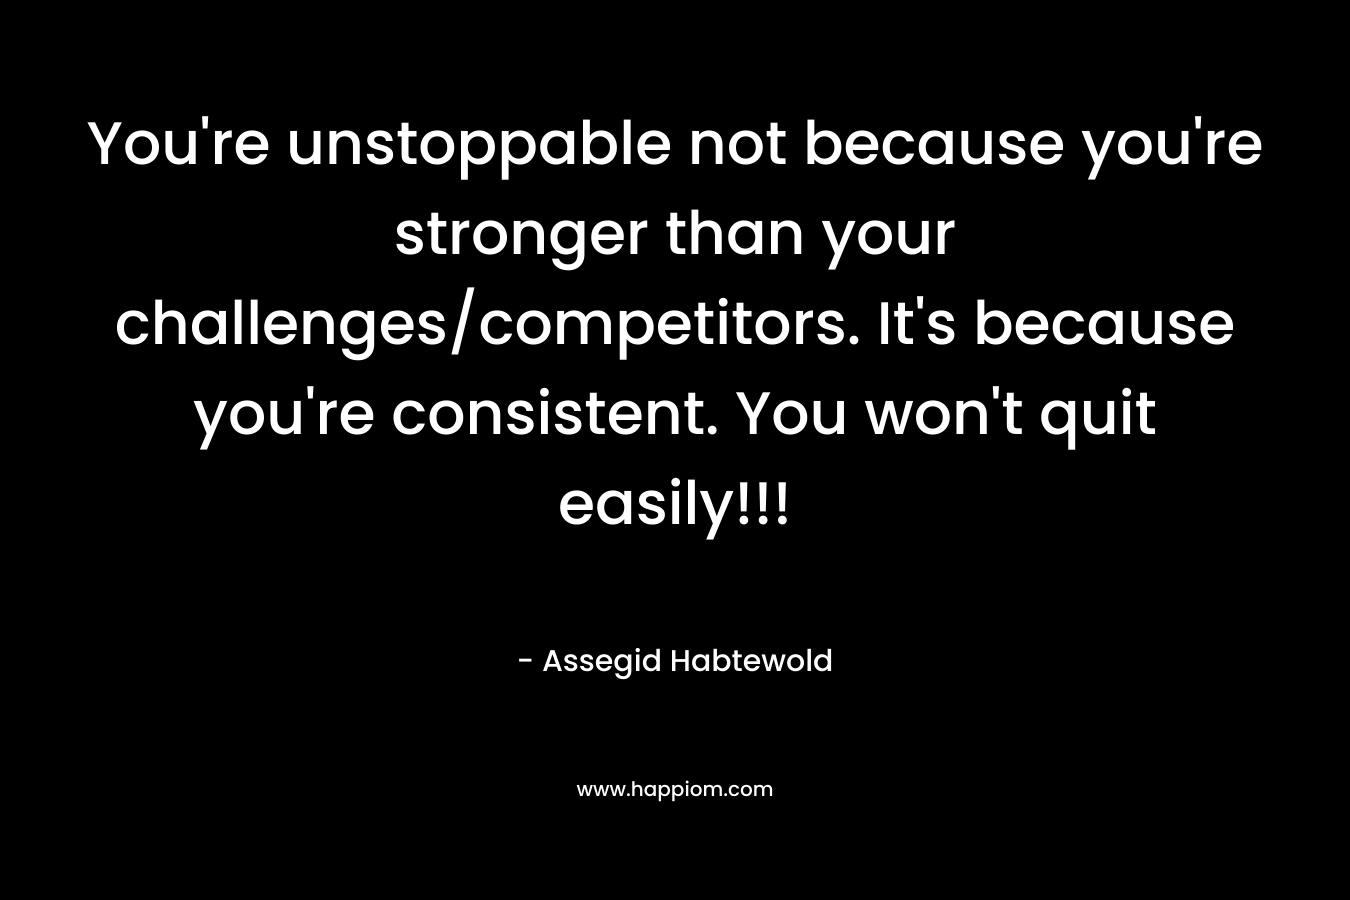 You’re unstoppable not because you’re stronger than your challenges/competitors. It’s because you’re consistent. You won’t quit easily!!! – Assegid Habtewold